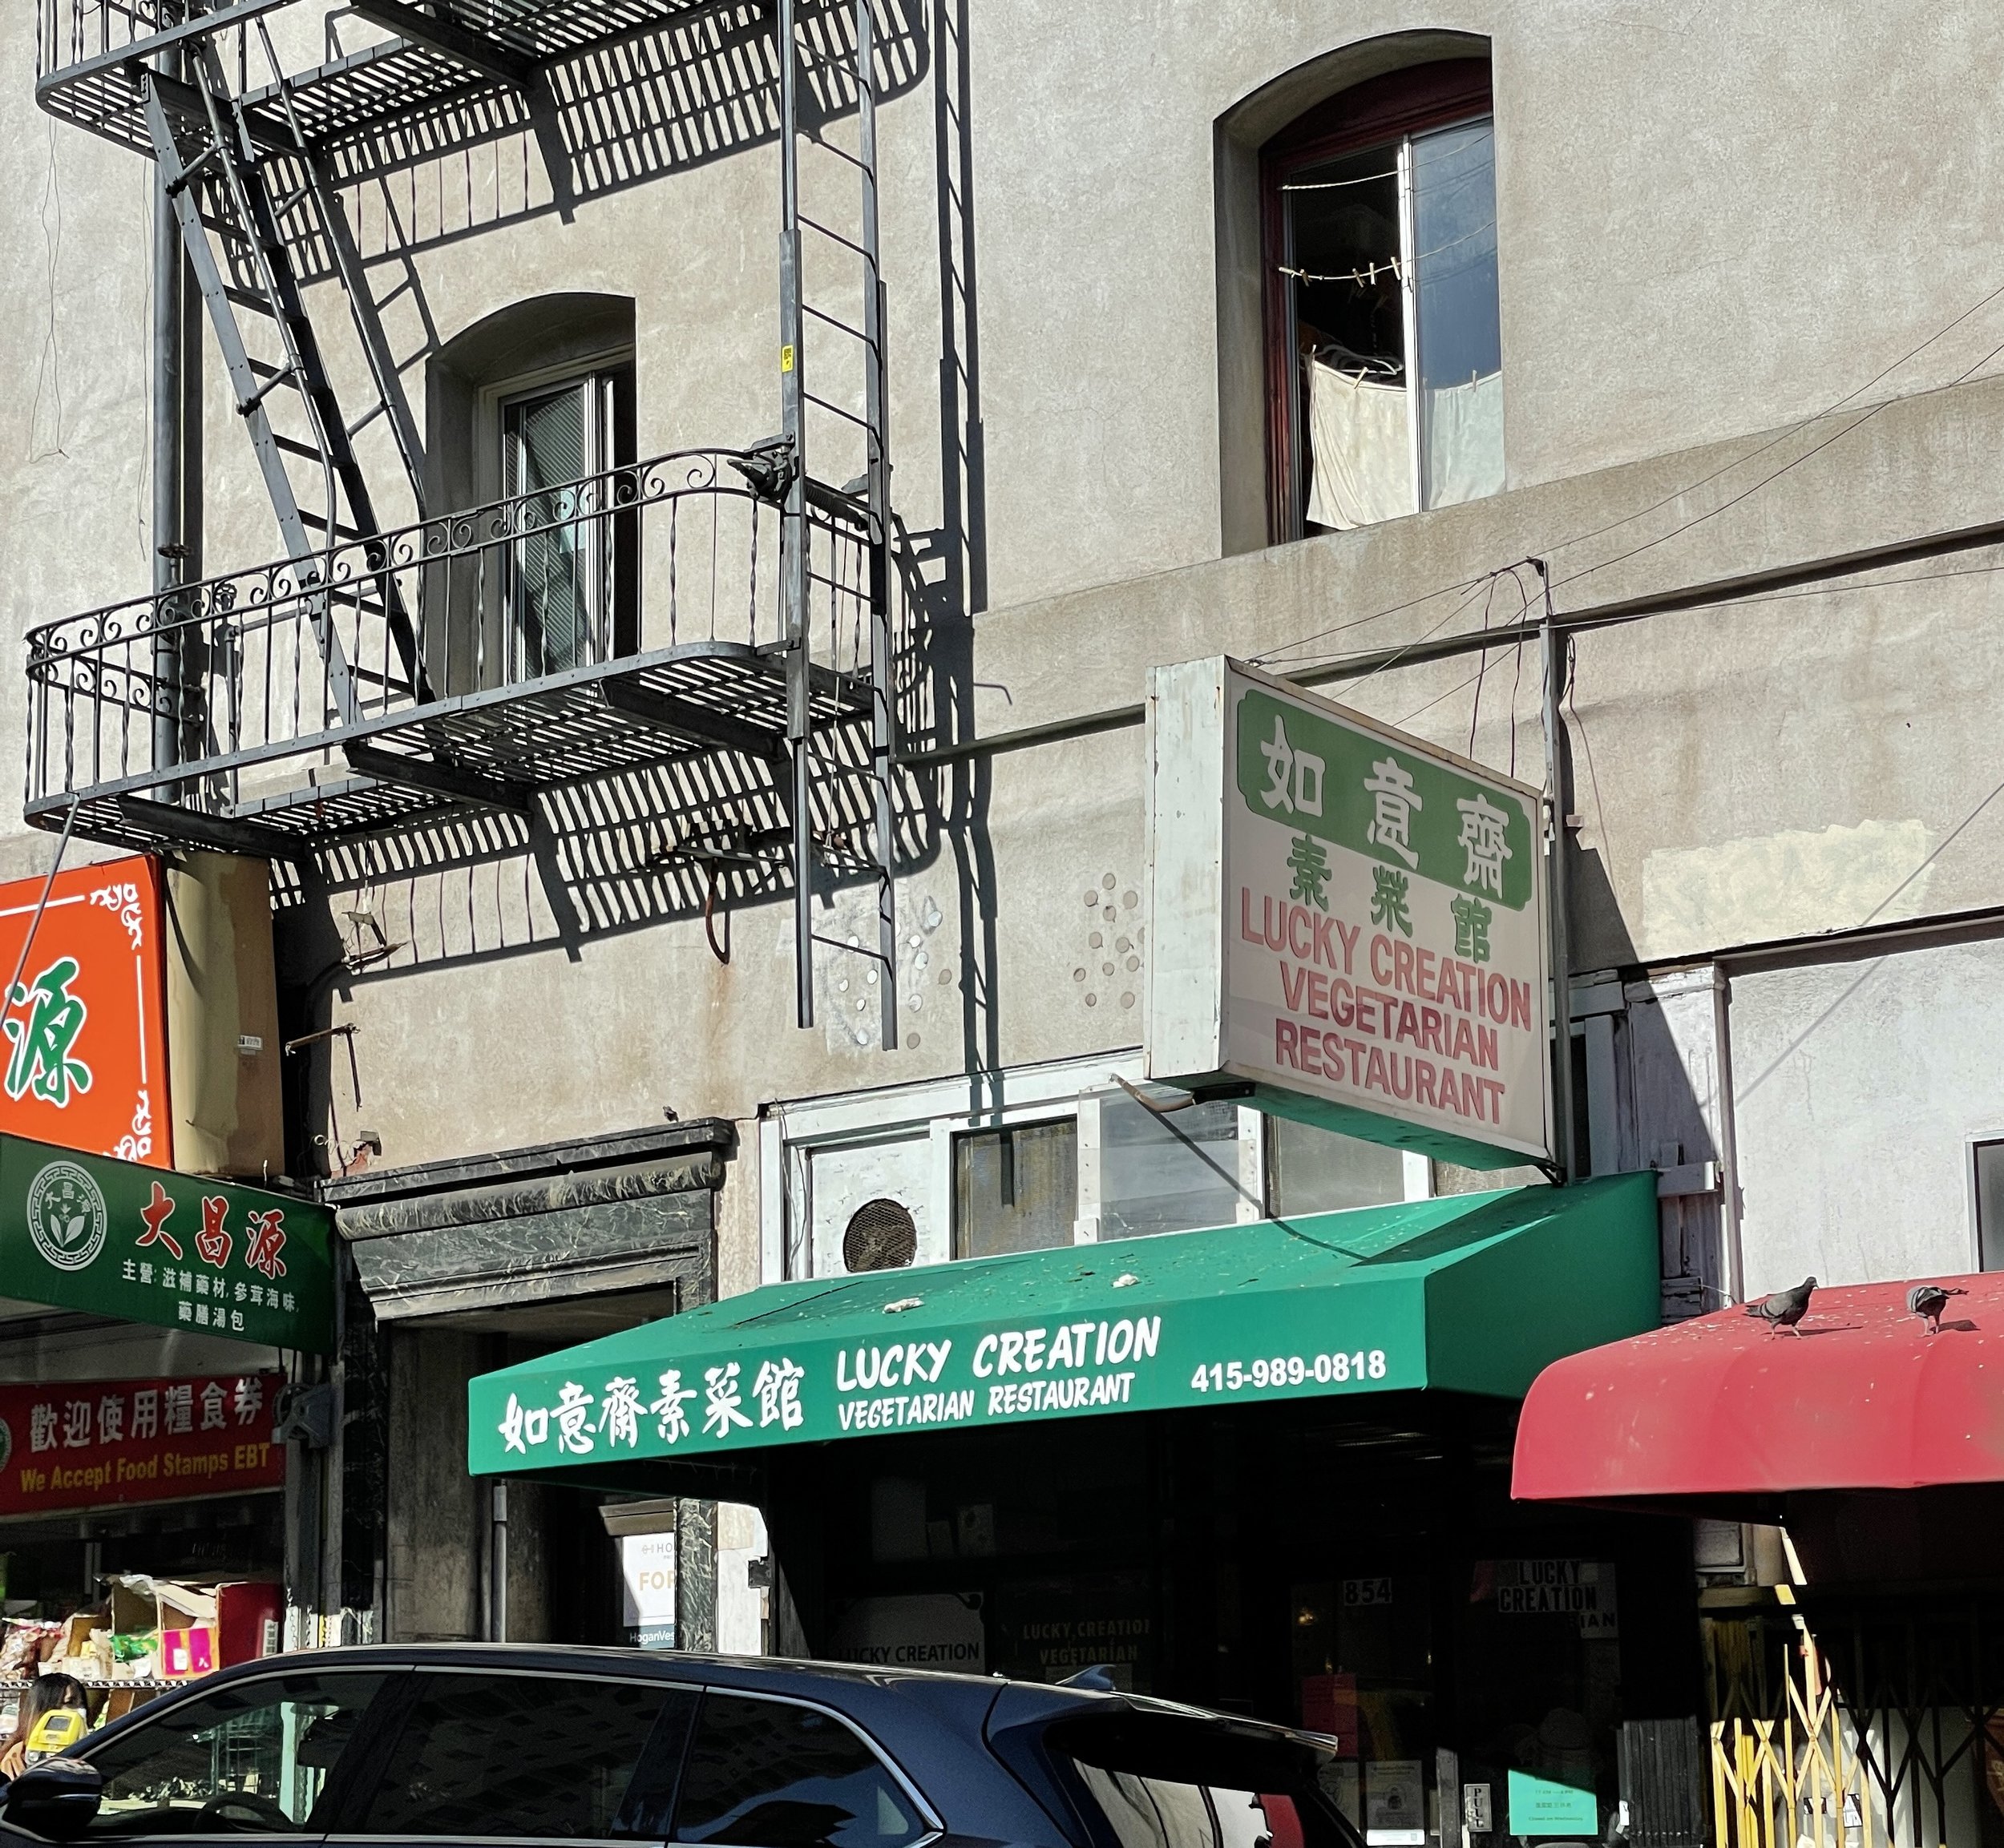 We were aiming here for lunch.  "Small Chinatown restaurant serving inventive vegetarian cuisine including mock meats."